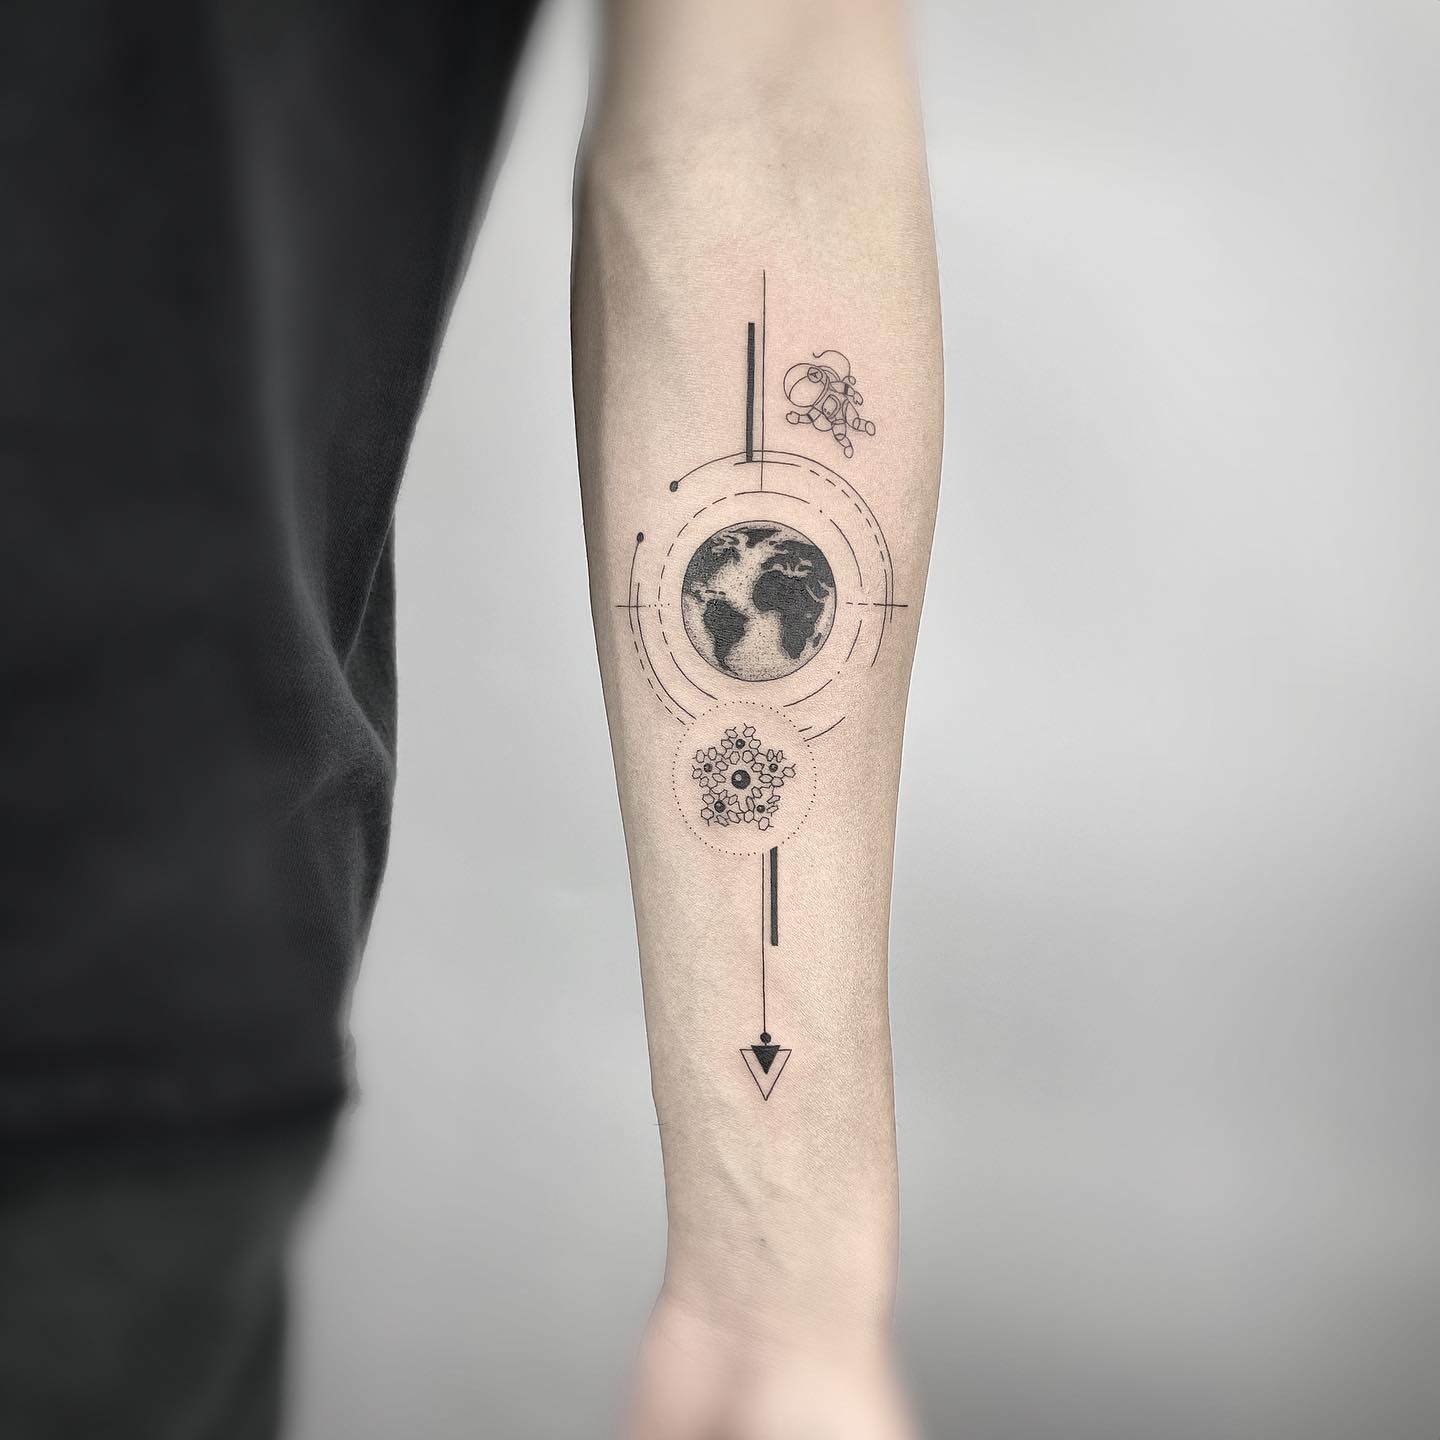 Asking for an advice for the next tattoos :) : r/TattooDesigns